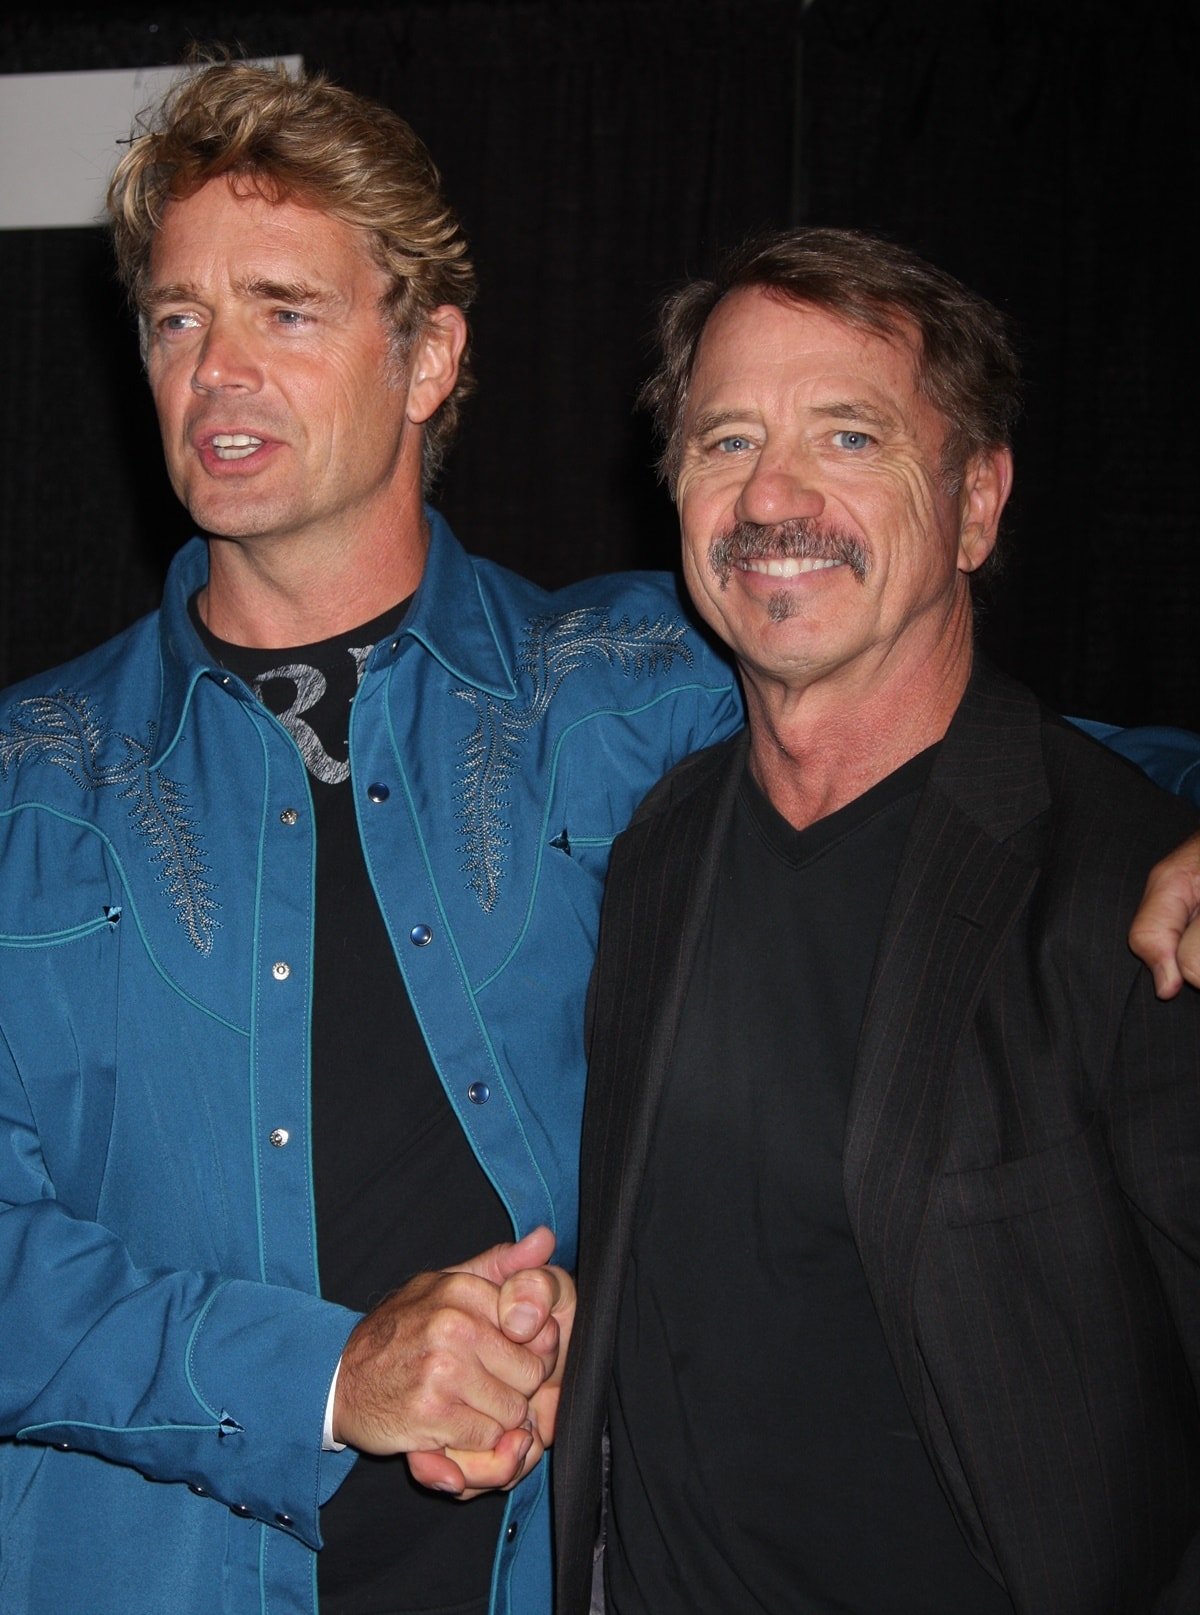 John Schneider and Tom Wopat attend Big Apple Comic Con at Pier 94 on October 16, 2009, in New York City